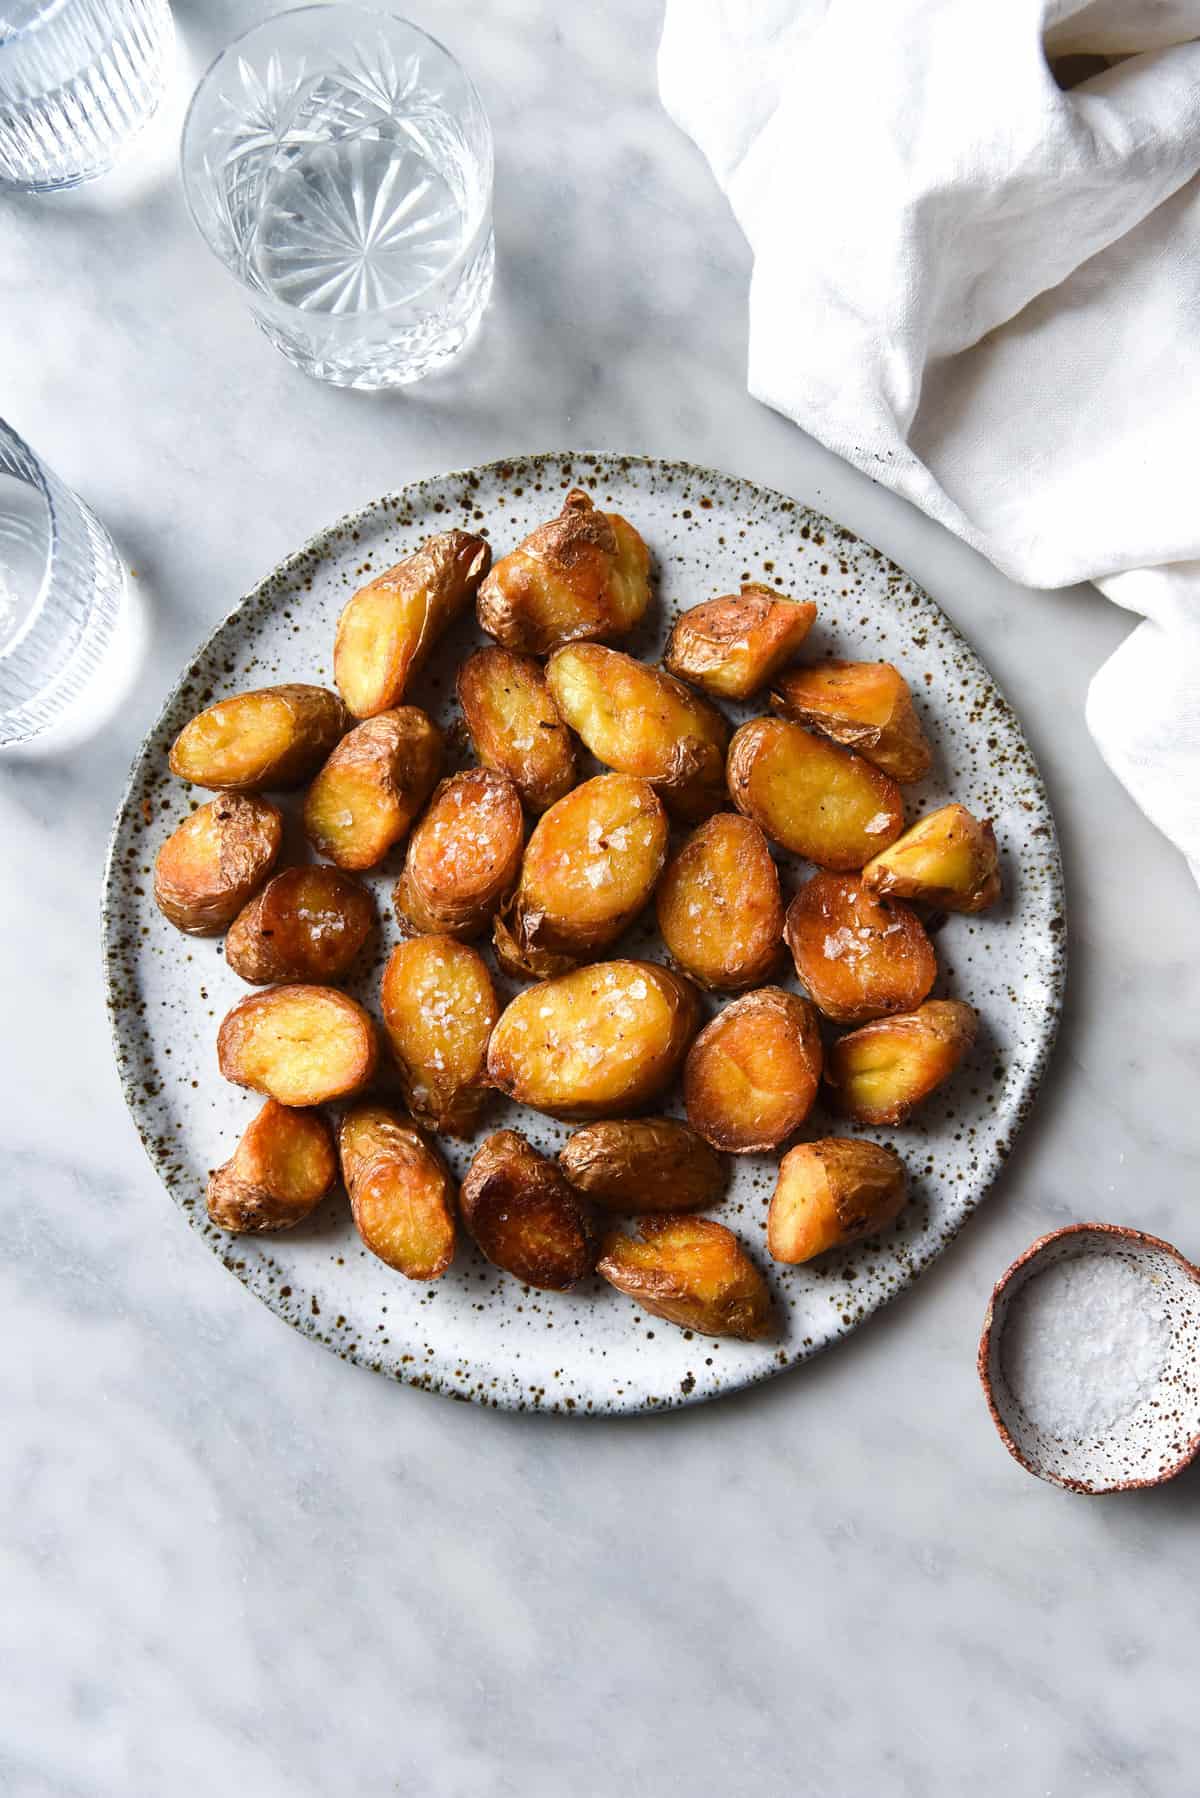 An aerial view of a white speckled ceramic plate topped with crispy roast potatoes. The potatoes are golden brown and topped with sea salt flakes. The plate sits on a white marble table surrounded by linen and pinch bowls of salt.